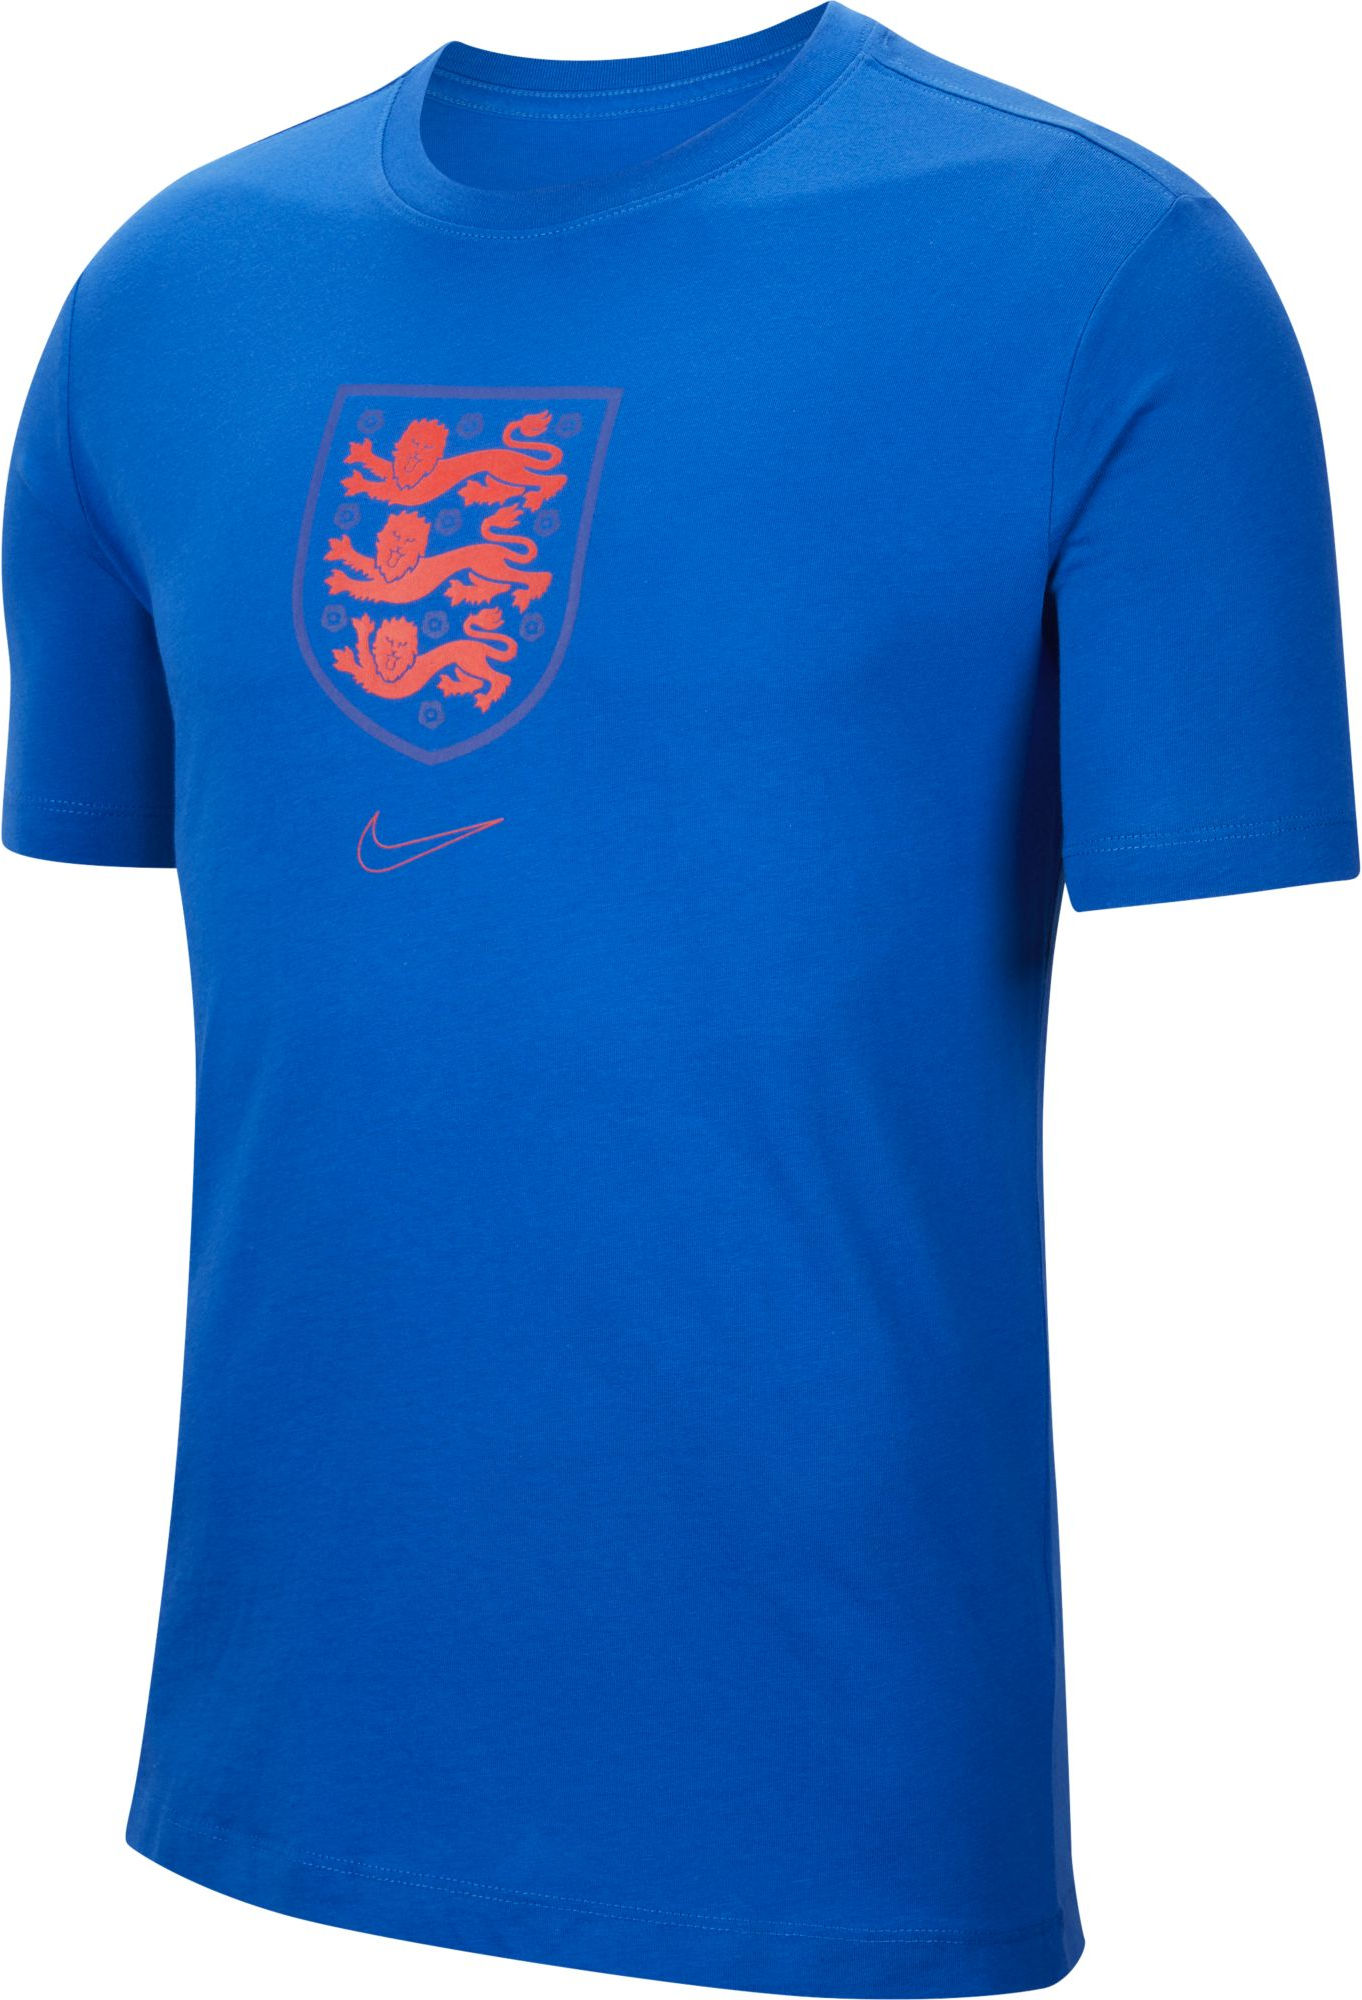 nike m ent crest tee 530015 cd0788 485